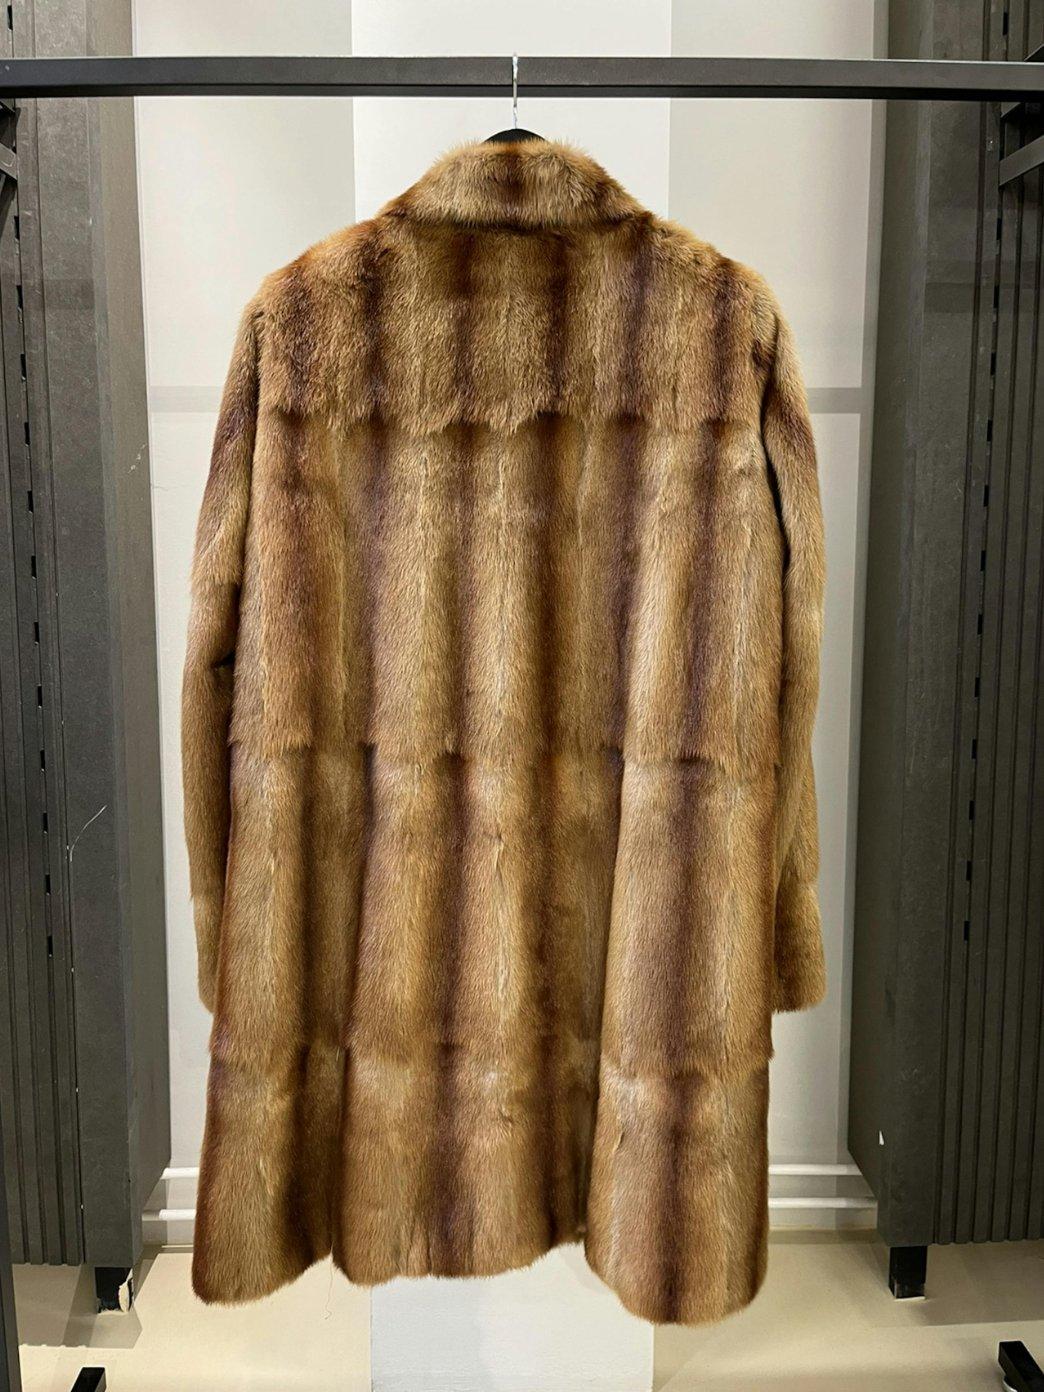 Alexander McQueen
 Fur Shawl Coat
Size IT 42

Absolutely stunning Alexander McQueen fur shawl coat in a size IT 42. From the 2005 fall winter collection. In perfect condition without any flaws. Features a built in shawl. Made in Italy.

